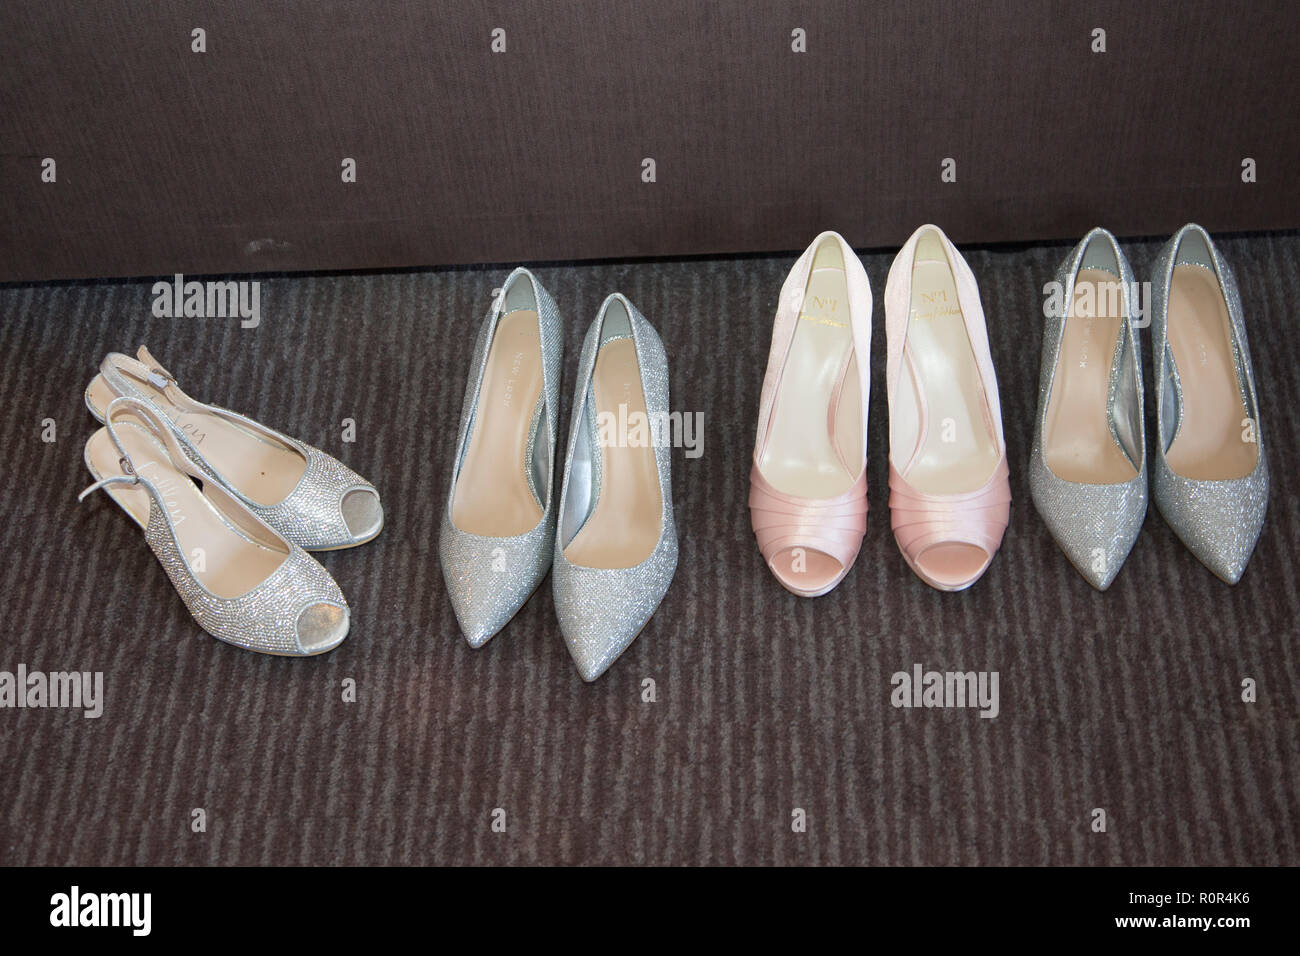 bride and bridesmaids shoes all lined up and ready to be worn on the wedding day Stock Photo